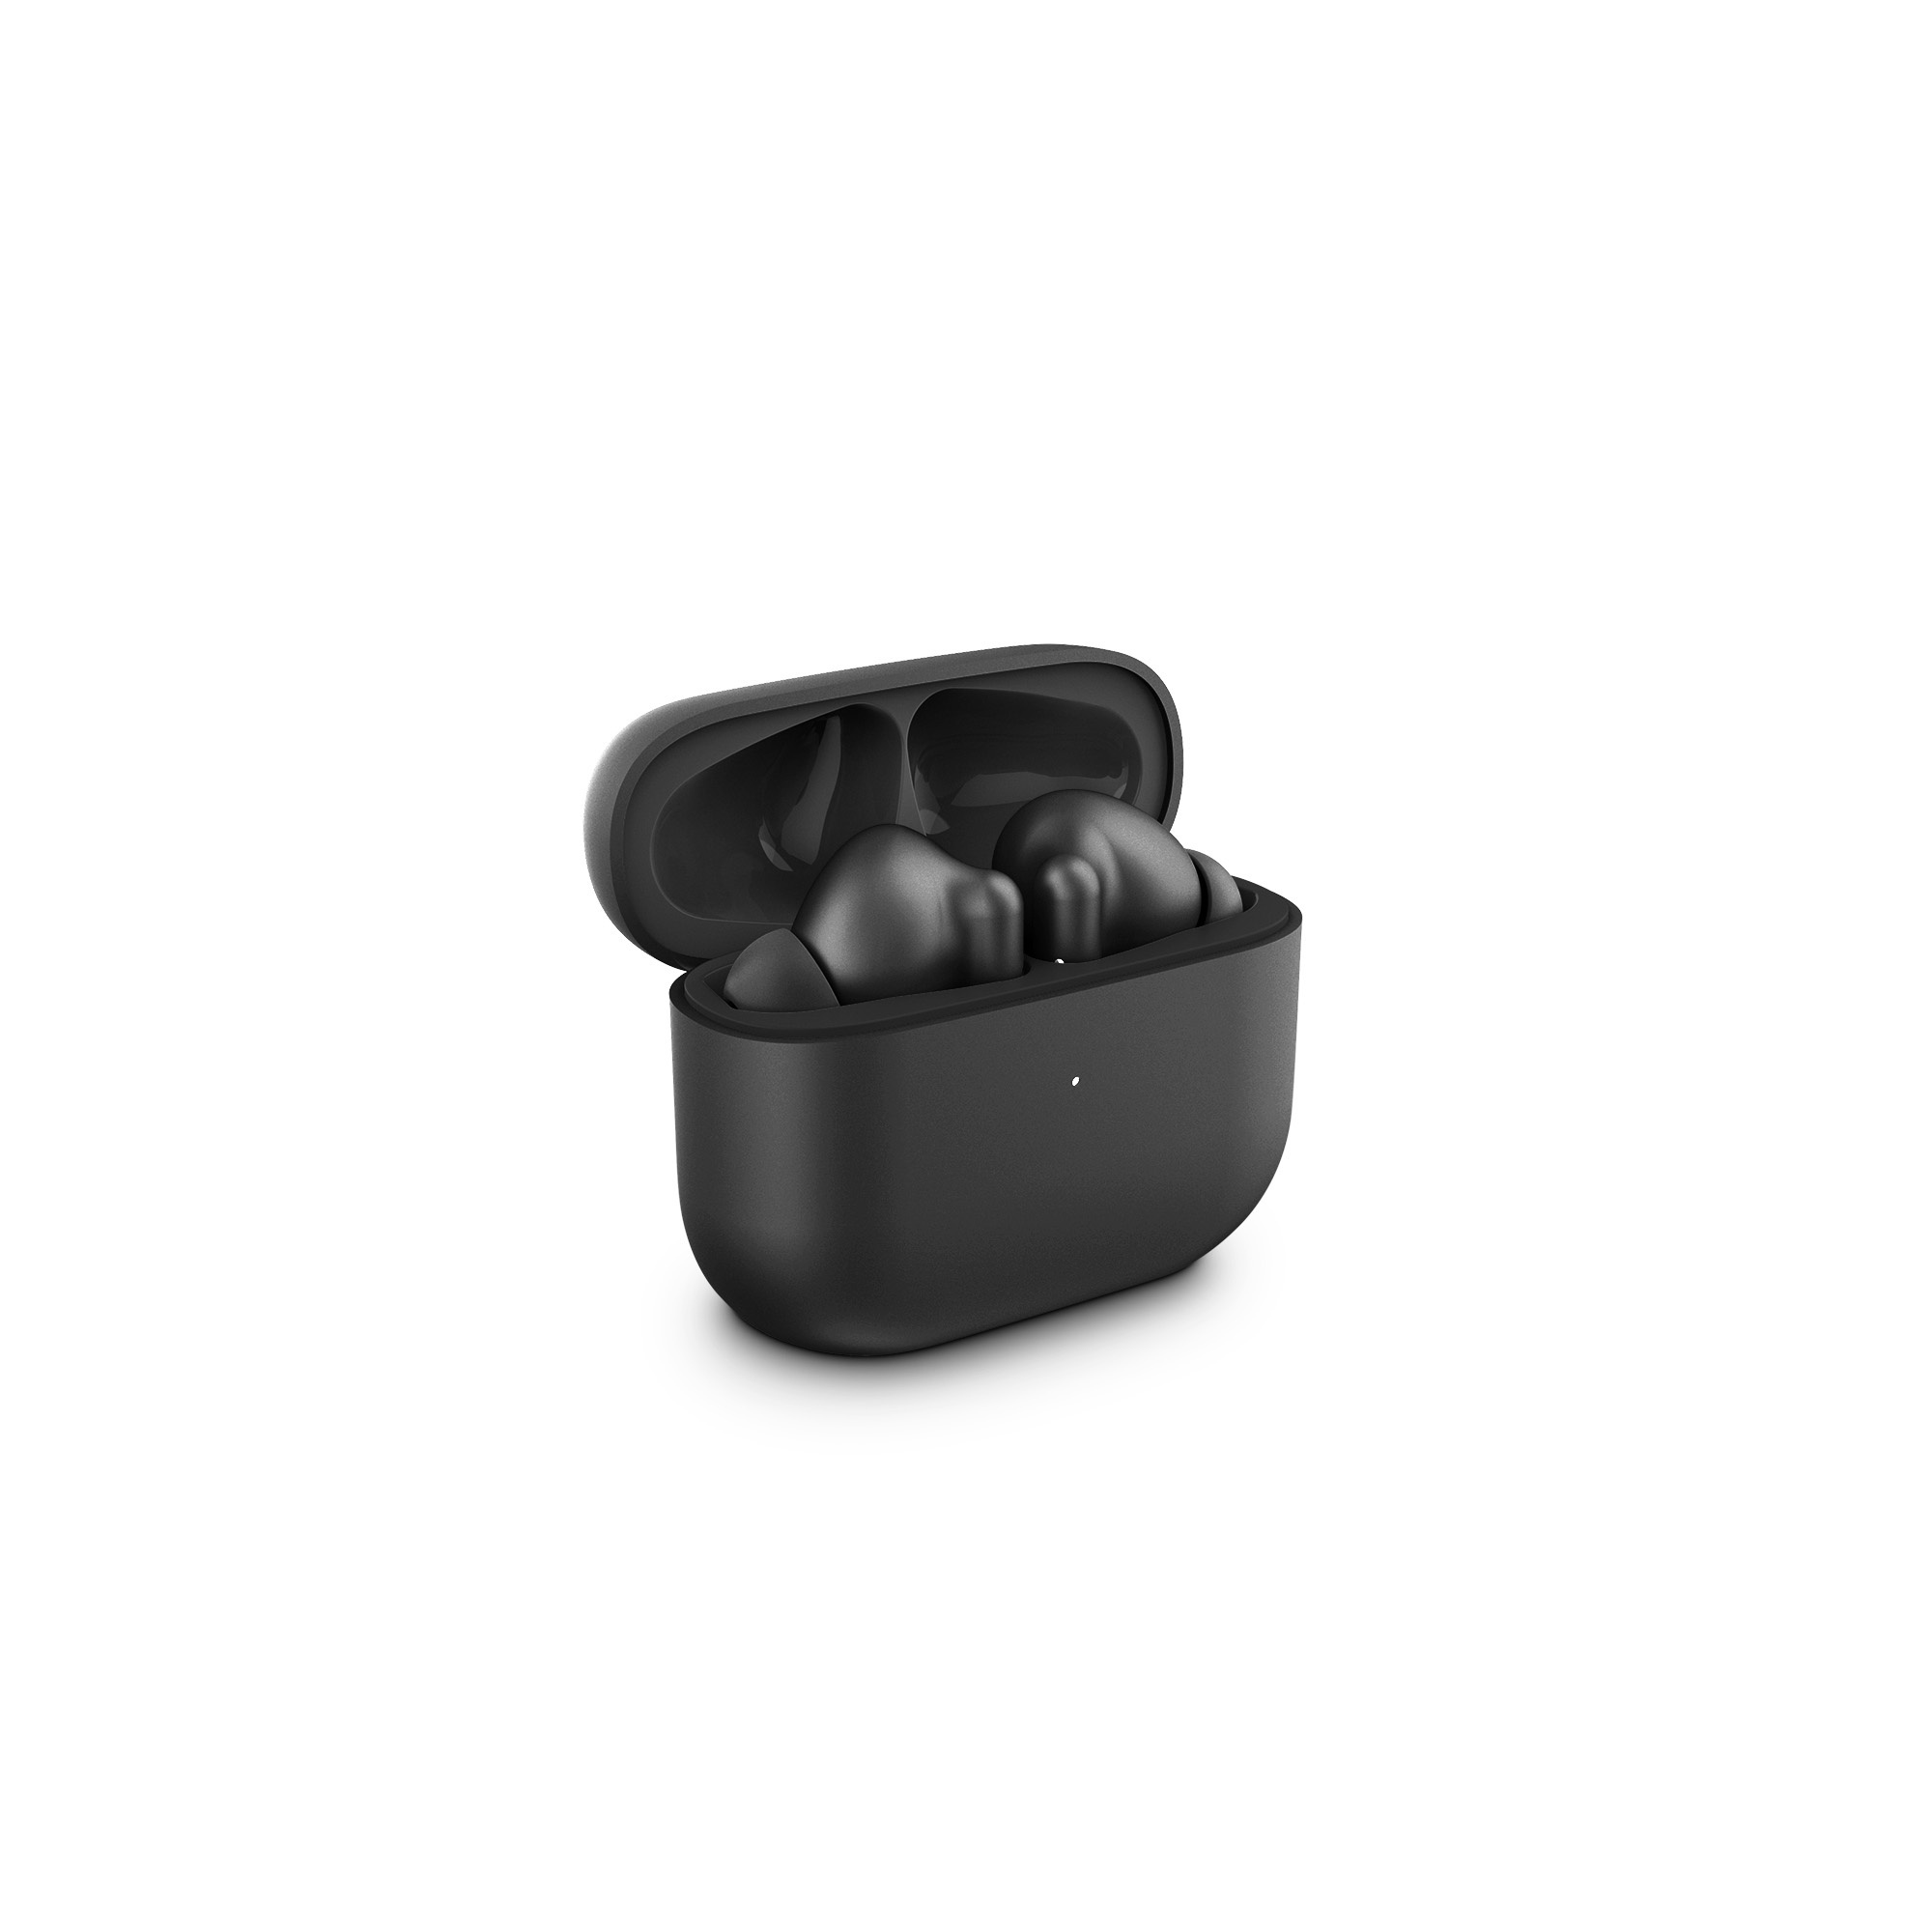 True wireless earbuds with up to 15 hours of battery life